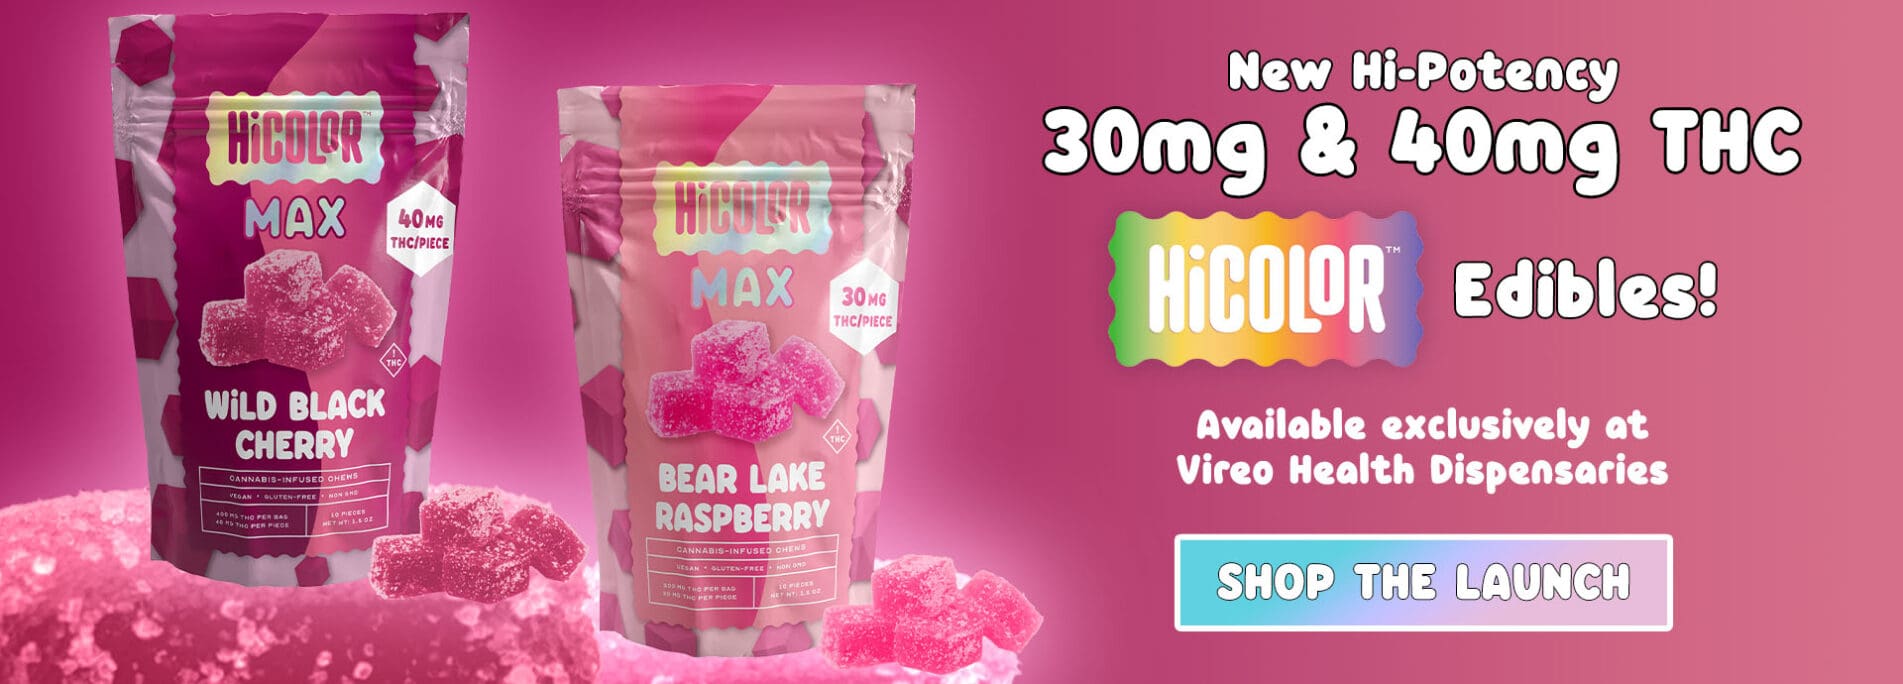 HiCOLOR Max Chews - High Potency Edibles exclusively at Vireo Health New York!